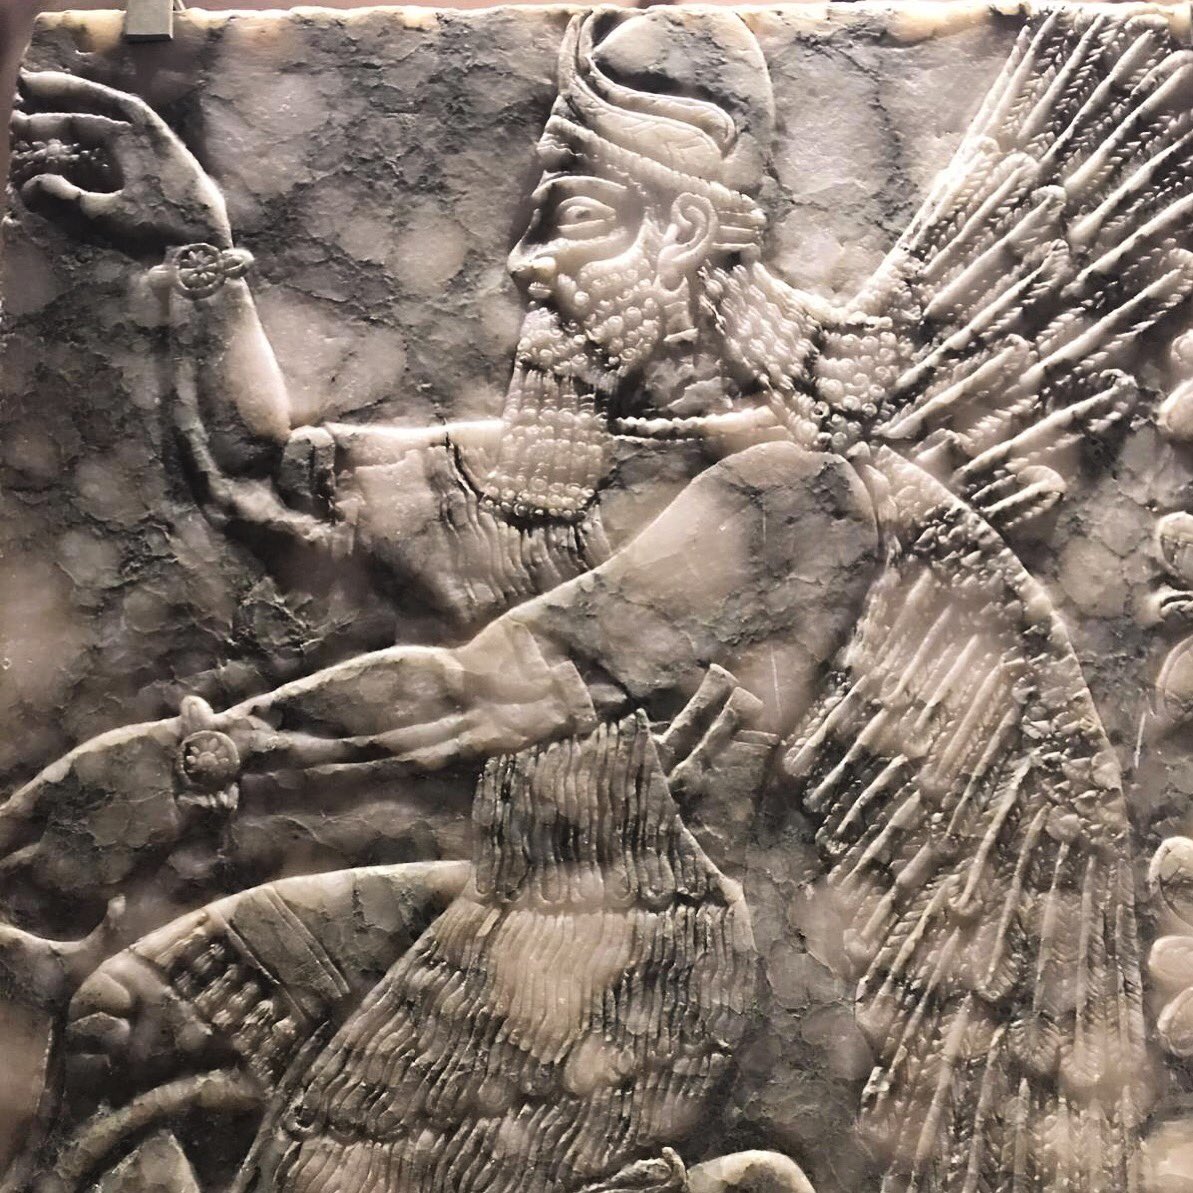 Great day looking round all the brilliant museums Cambridge has to offer. A particular favourite being the Fitzwilliam Museum. This is a relief of an Assyrian Diety from 879 BC.
.
.
.
#artrekking #fitzwilliammuseum #cambridge #articheck